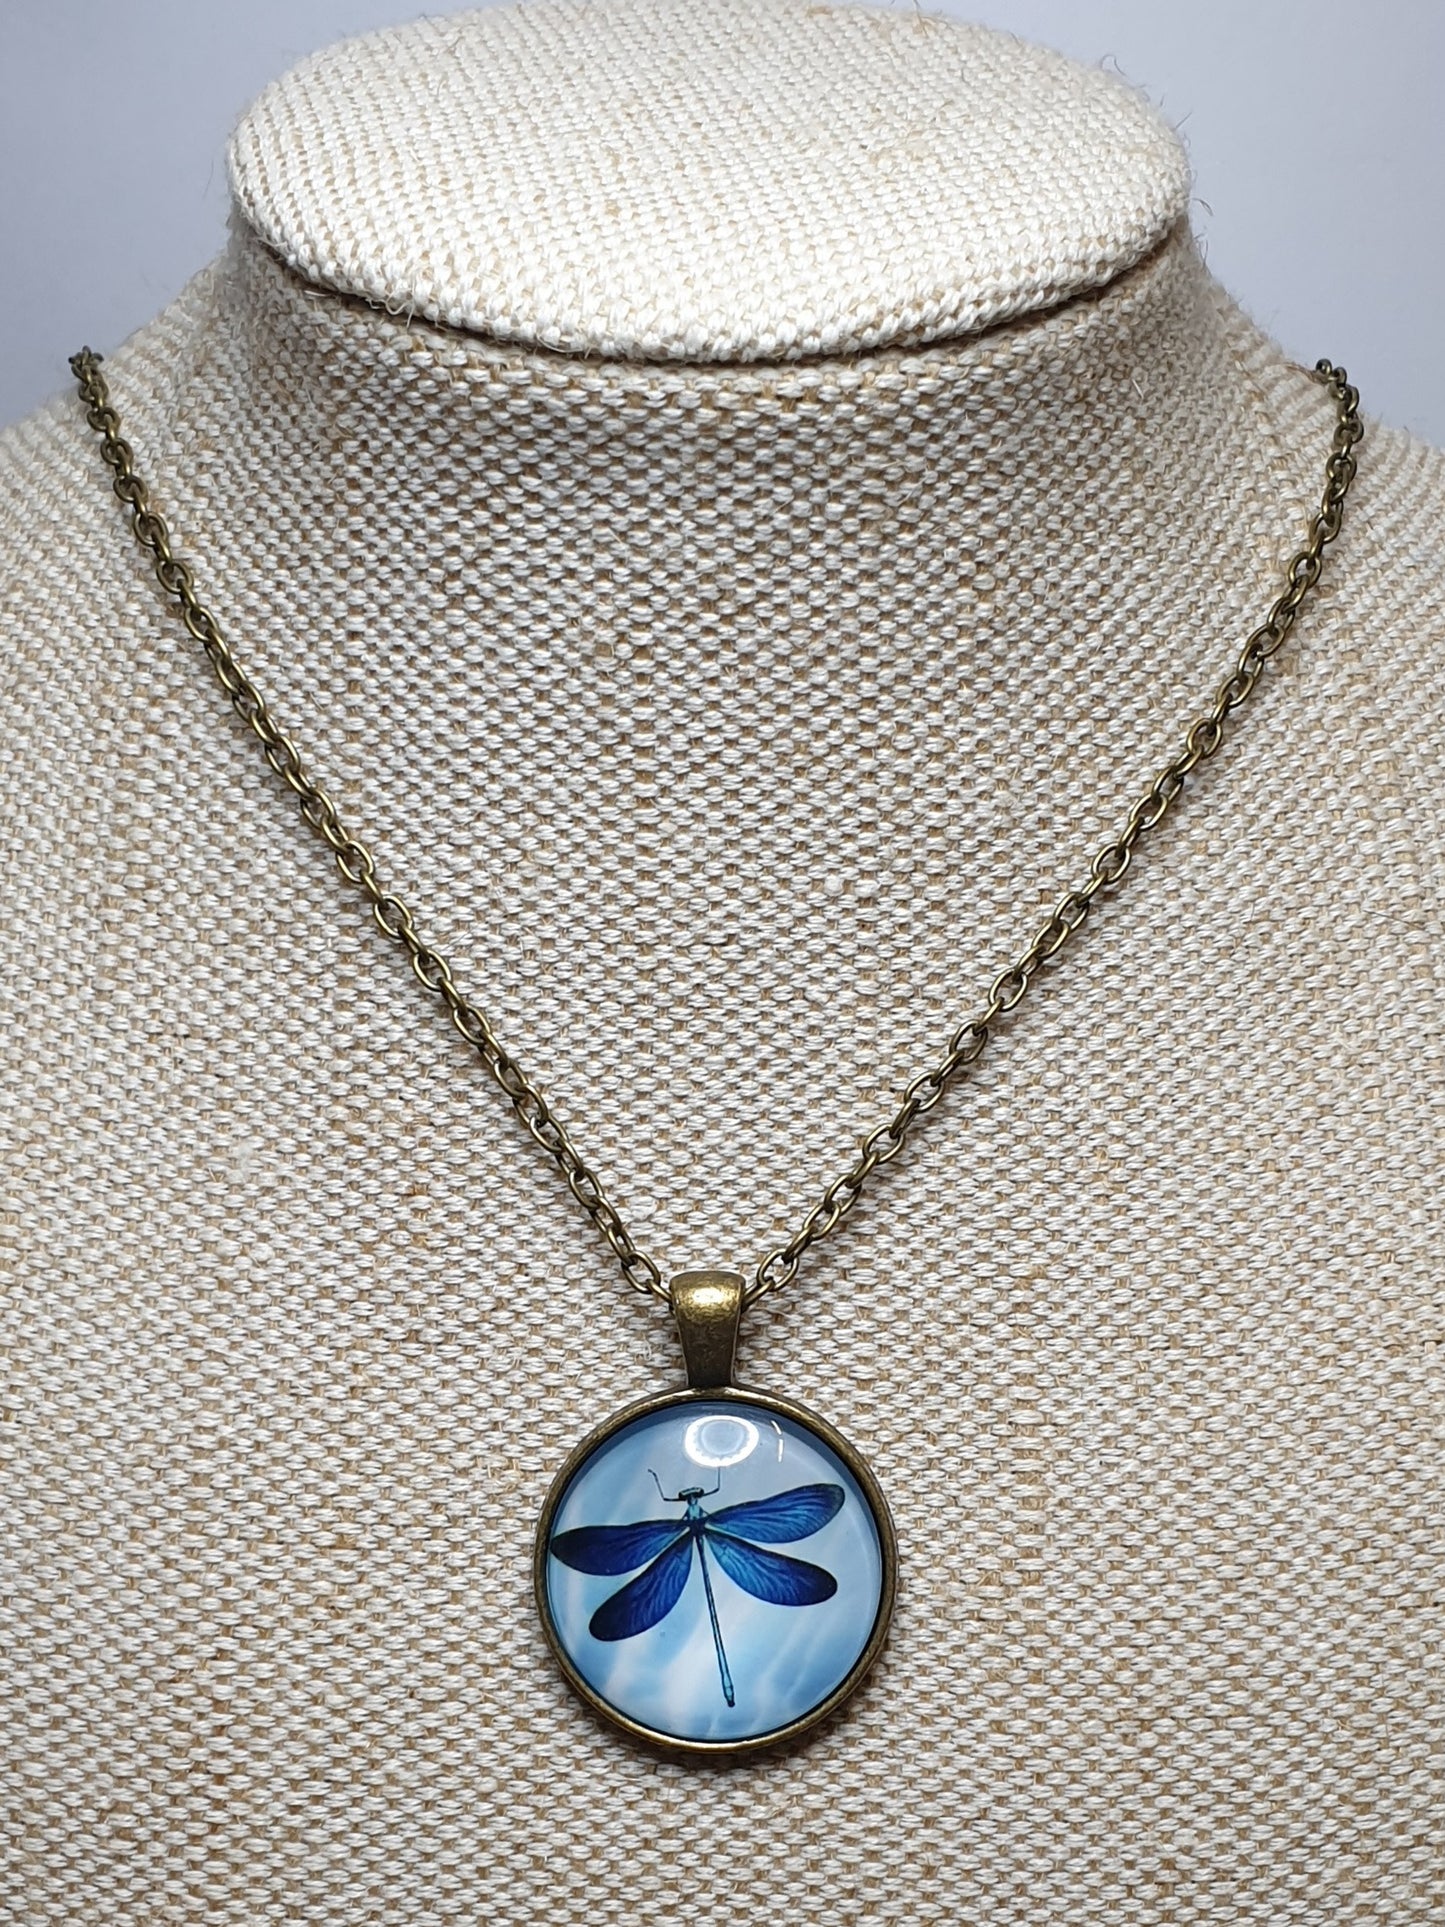 Dragonfly Necklace - Blue Wings